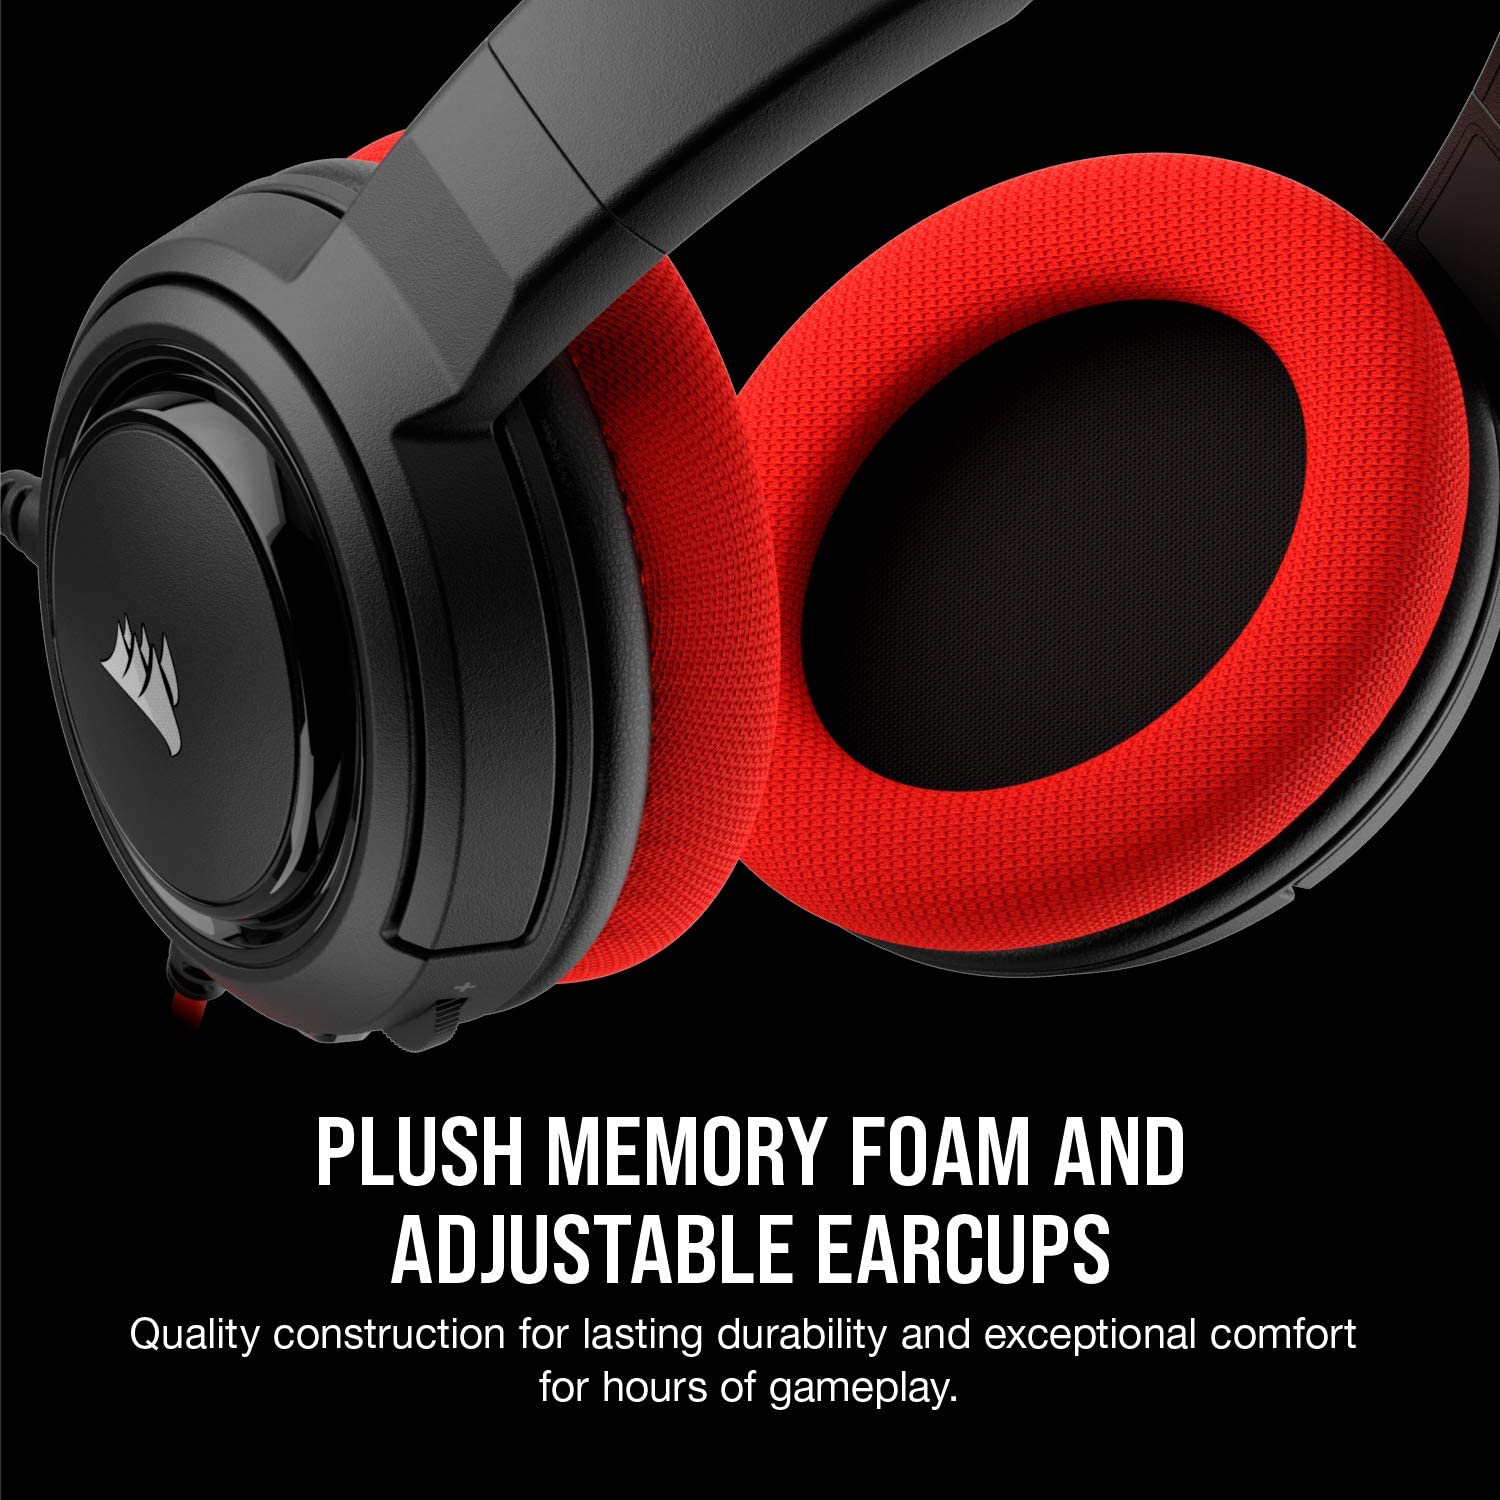 AURICULARES CORSAIR HS35 STEREO GAMING CARBON